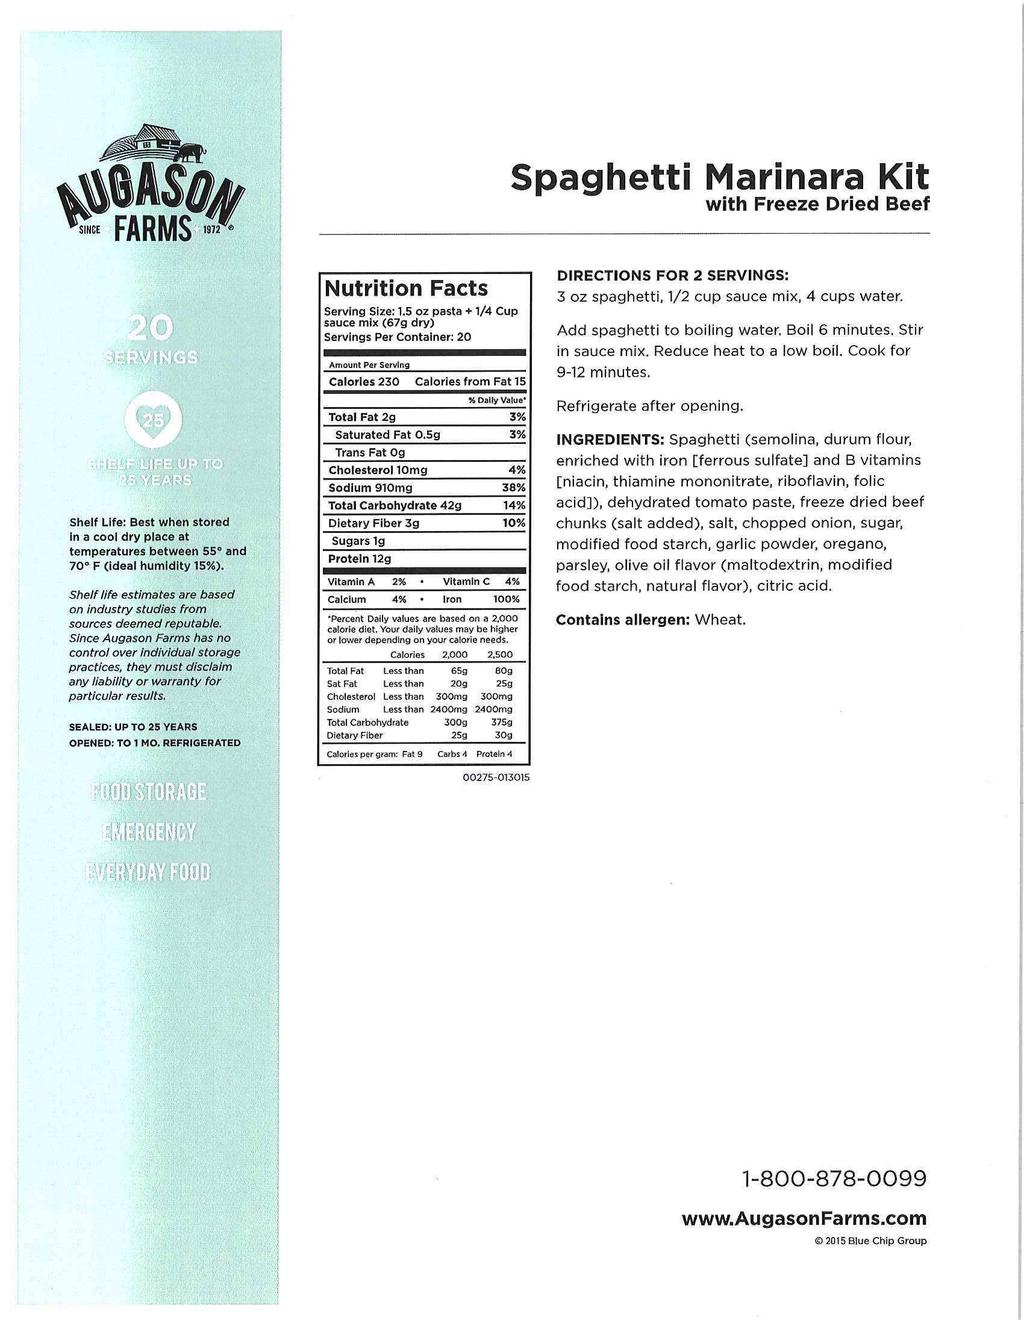 Spaghetti Marinara Kit with Freeze D ied Beef In a cool d y place at 70 F (ideal hu idity 15%). Serving Size: 1.